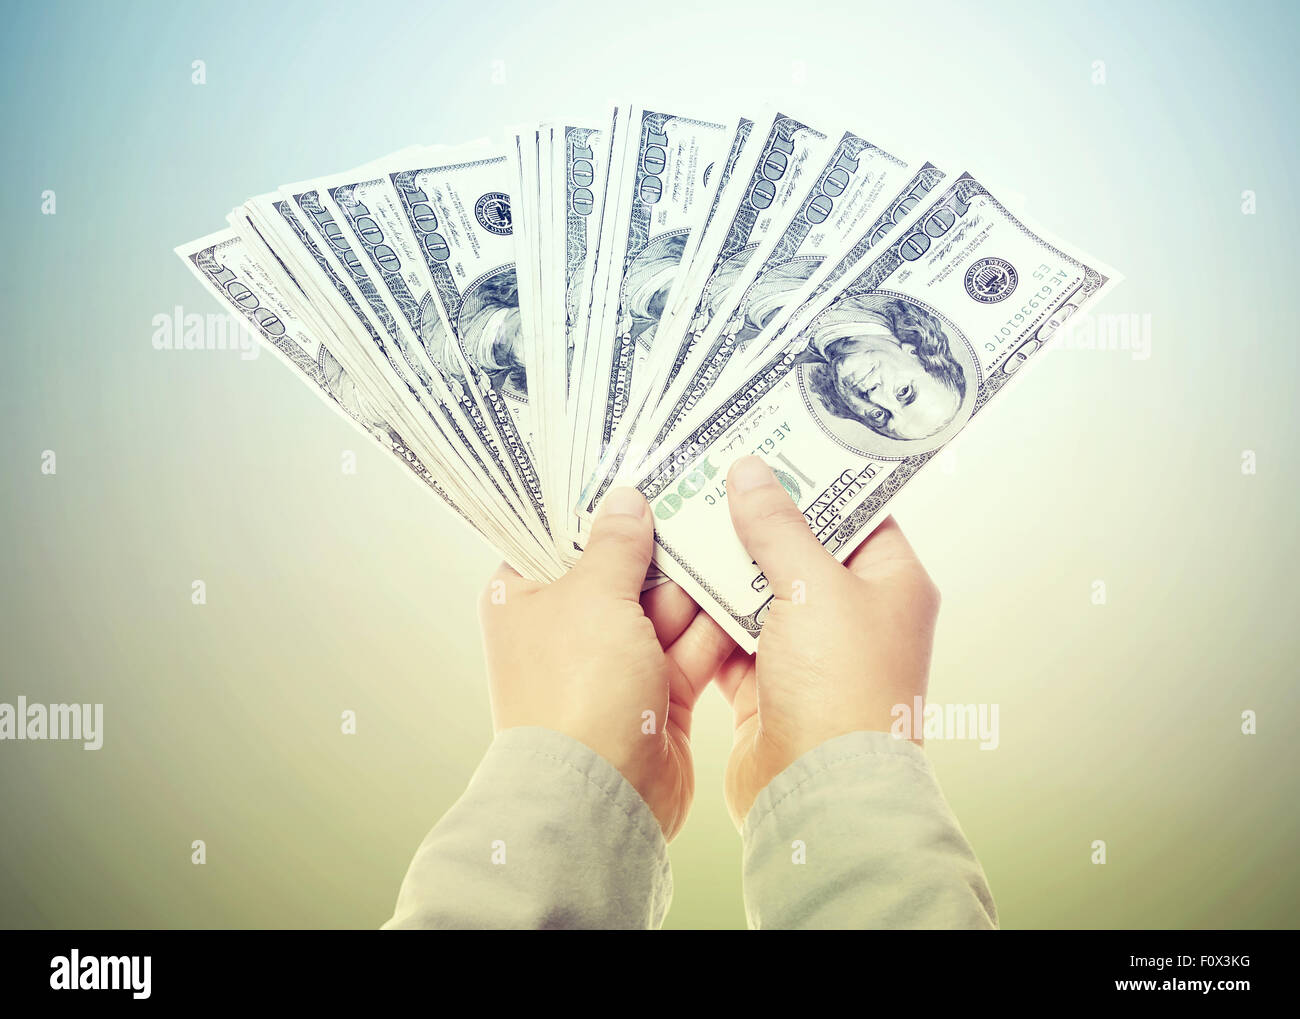 Hand Displaying a Spread of Cash in a Vintage Light Stock Photo